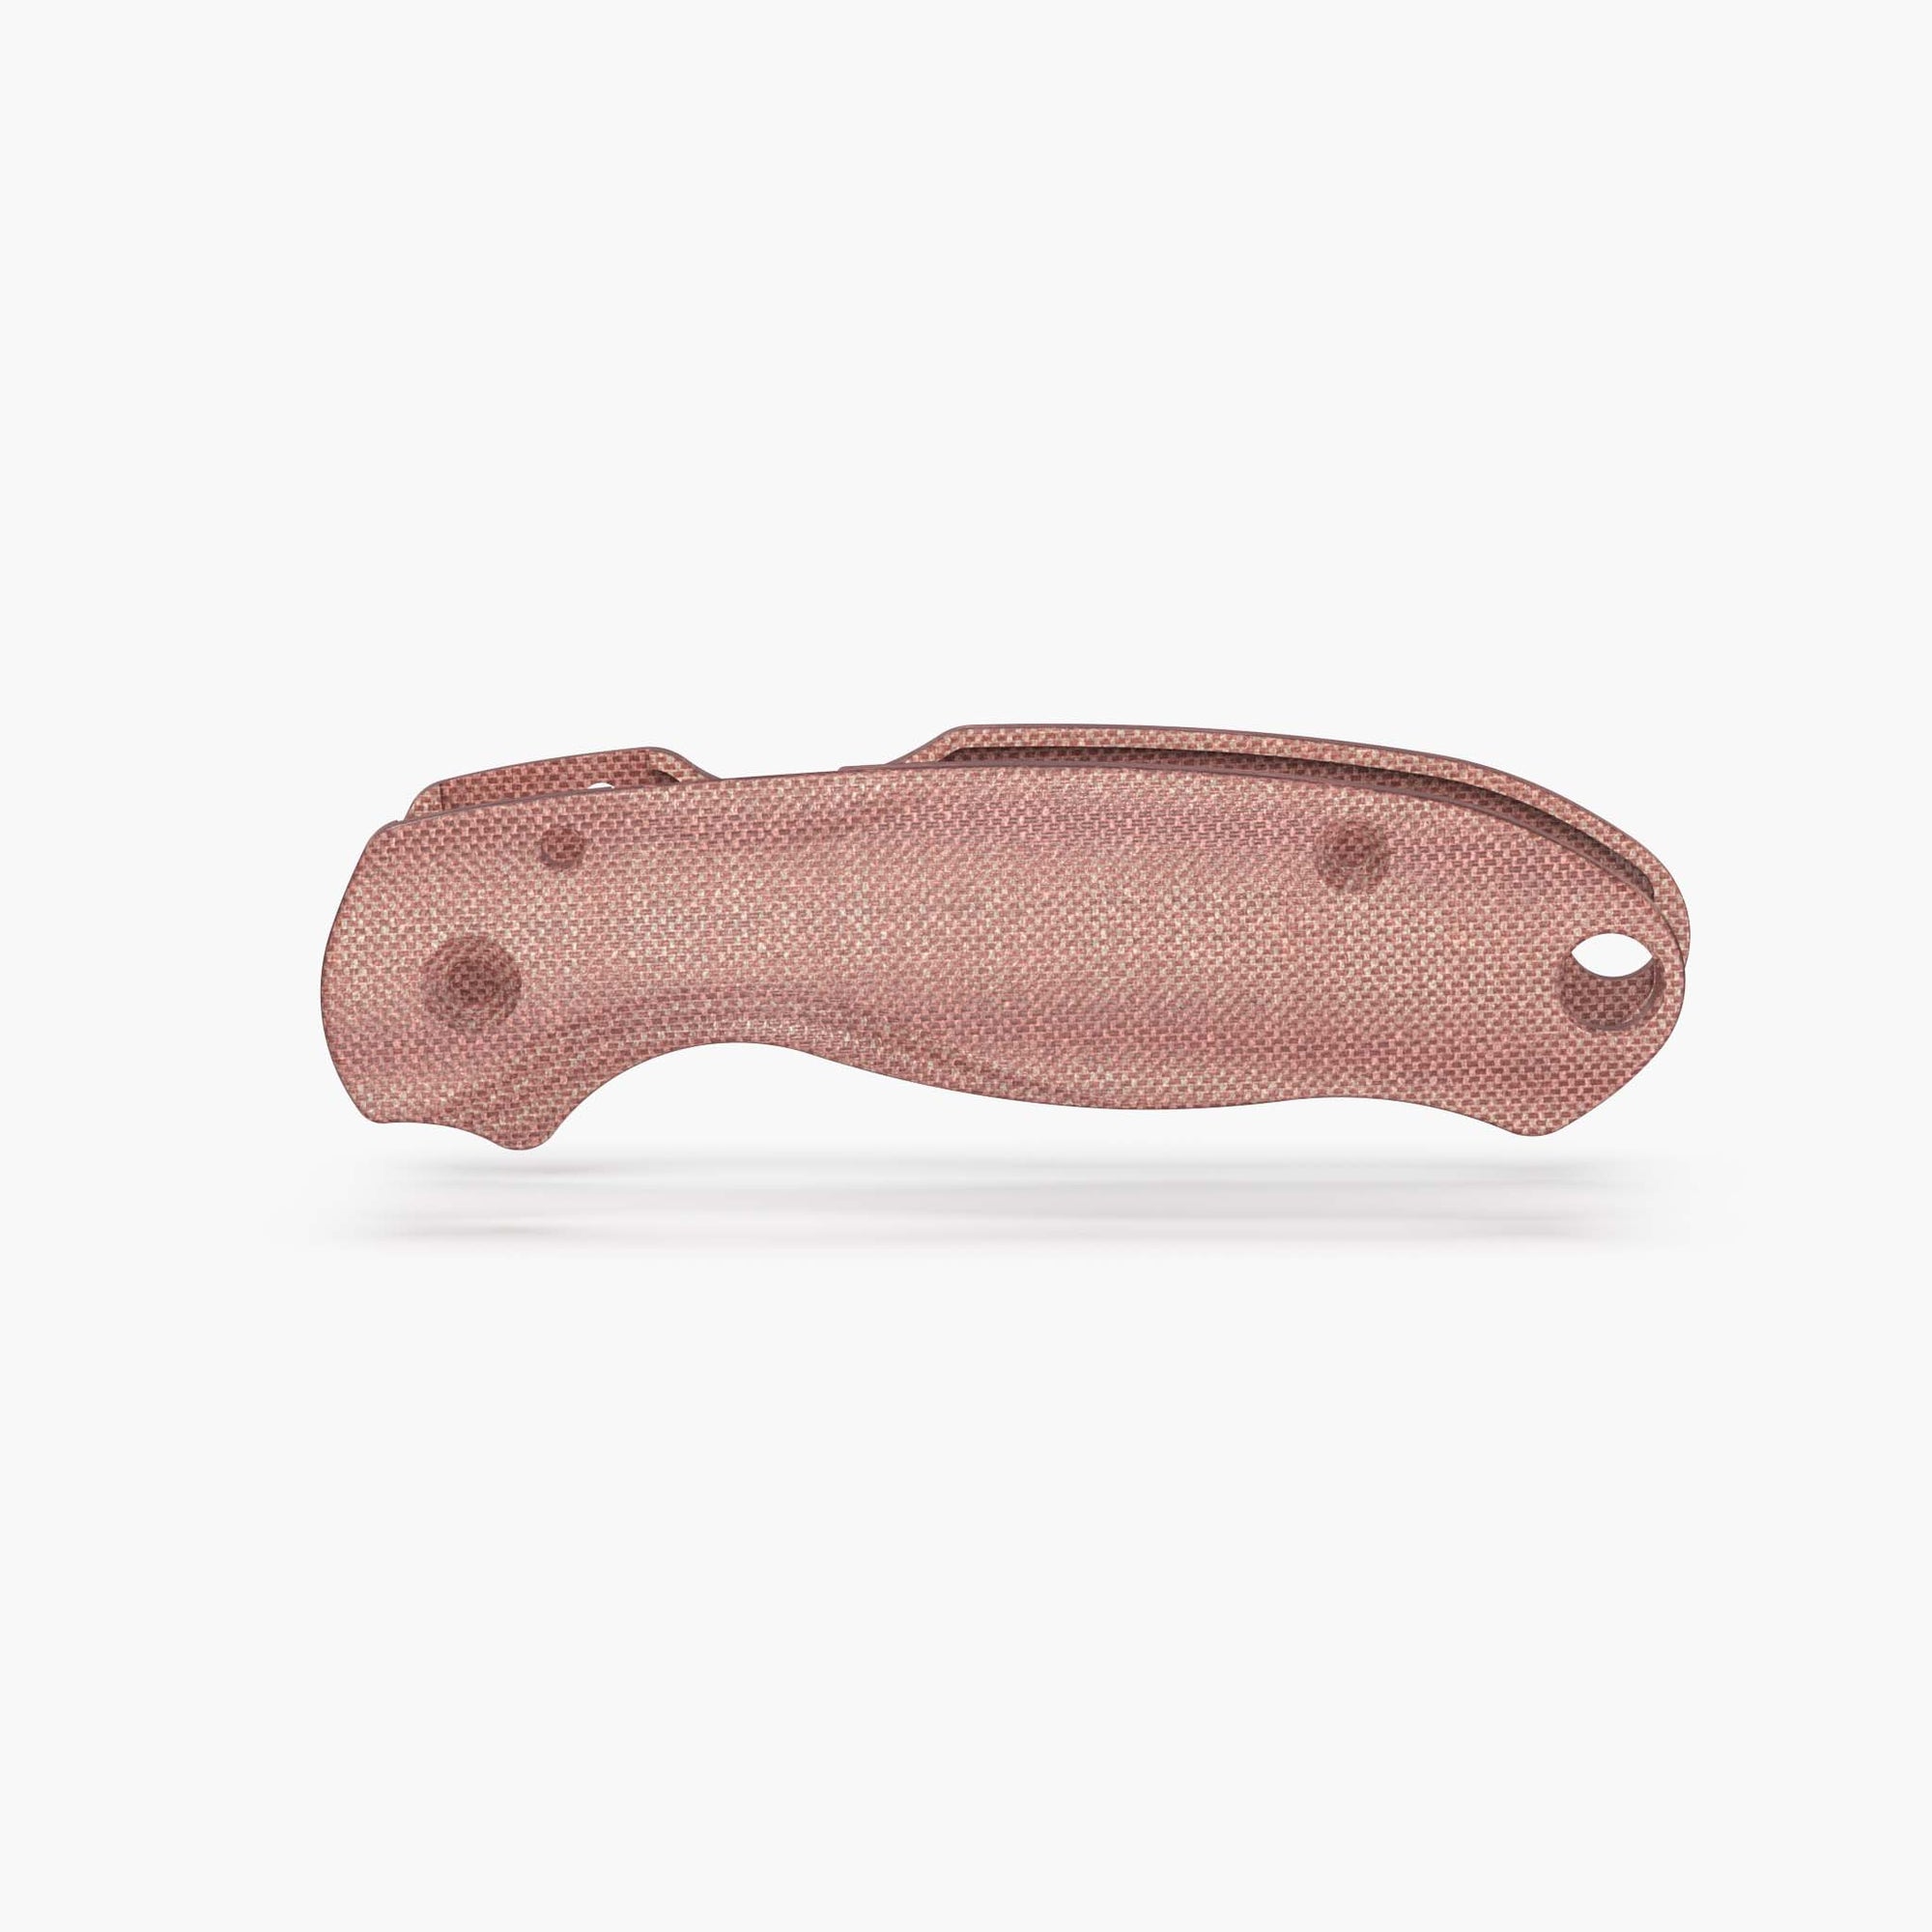 Limited Editon Lotus Scales for Spyderco Para 3 Knife